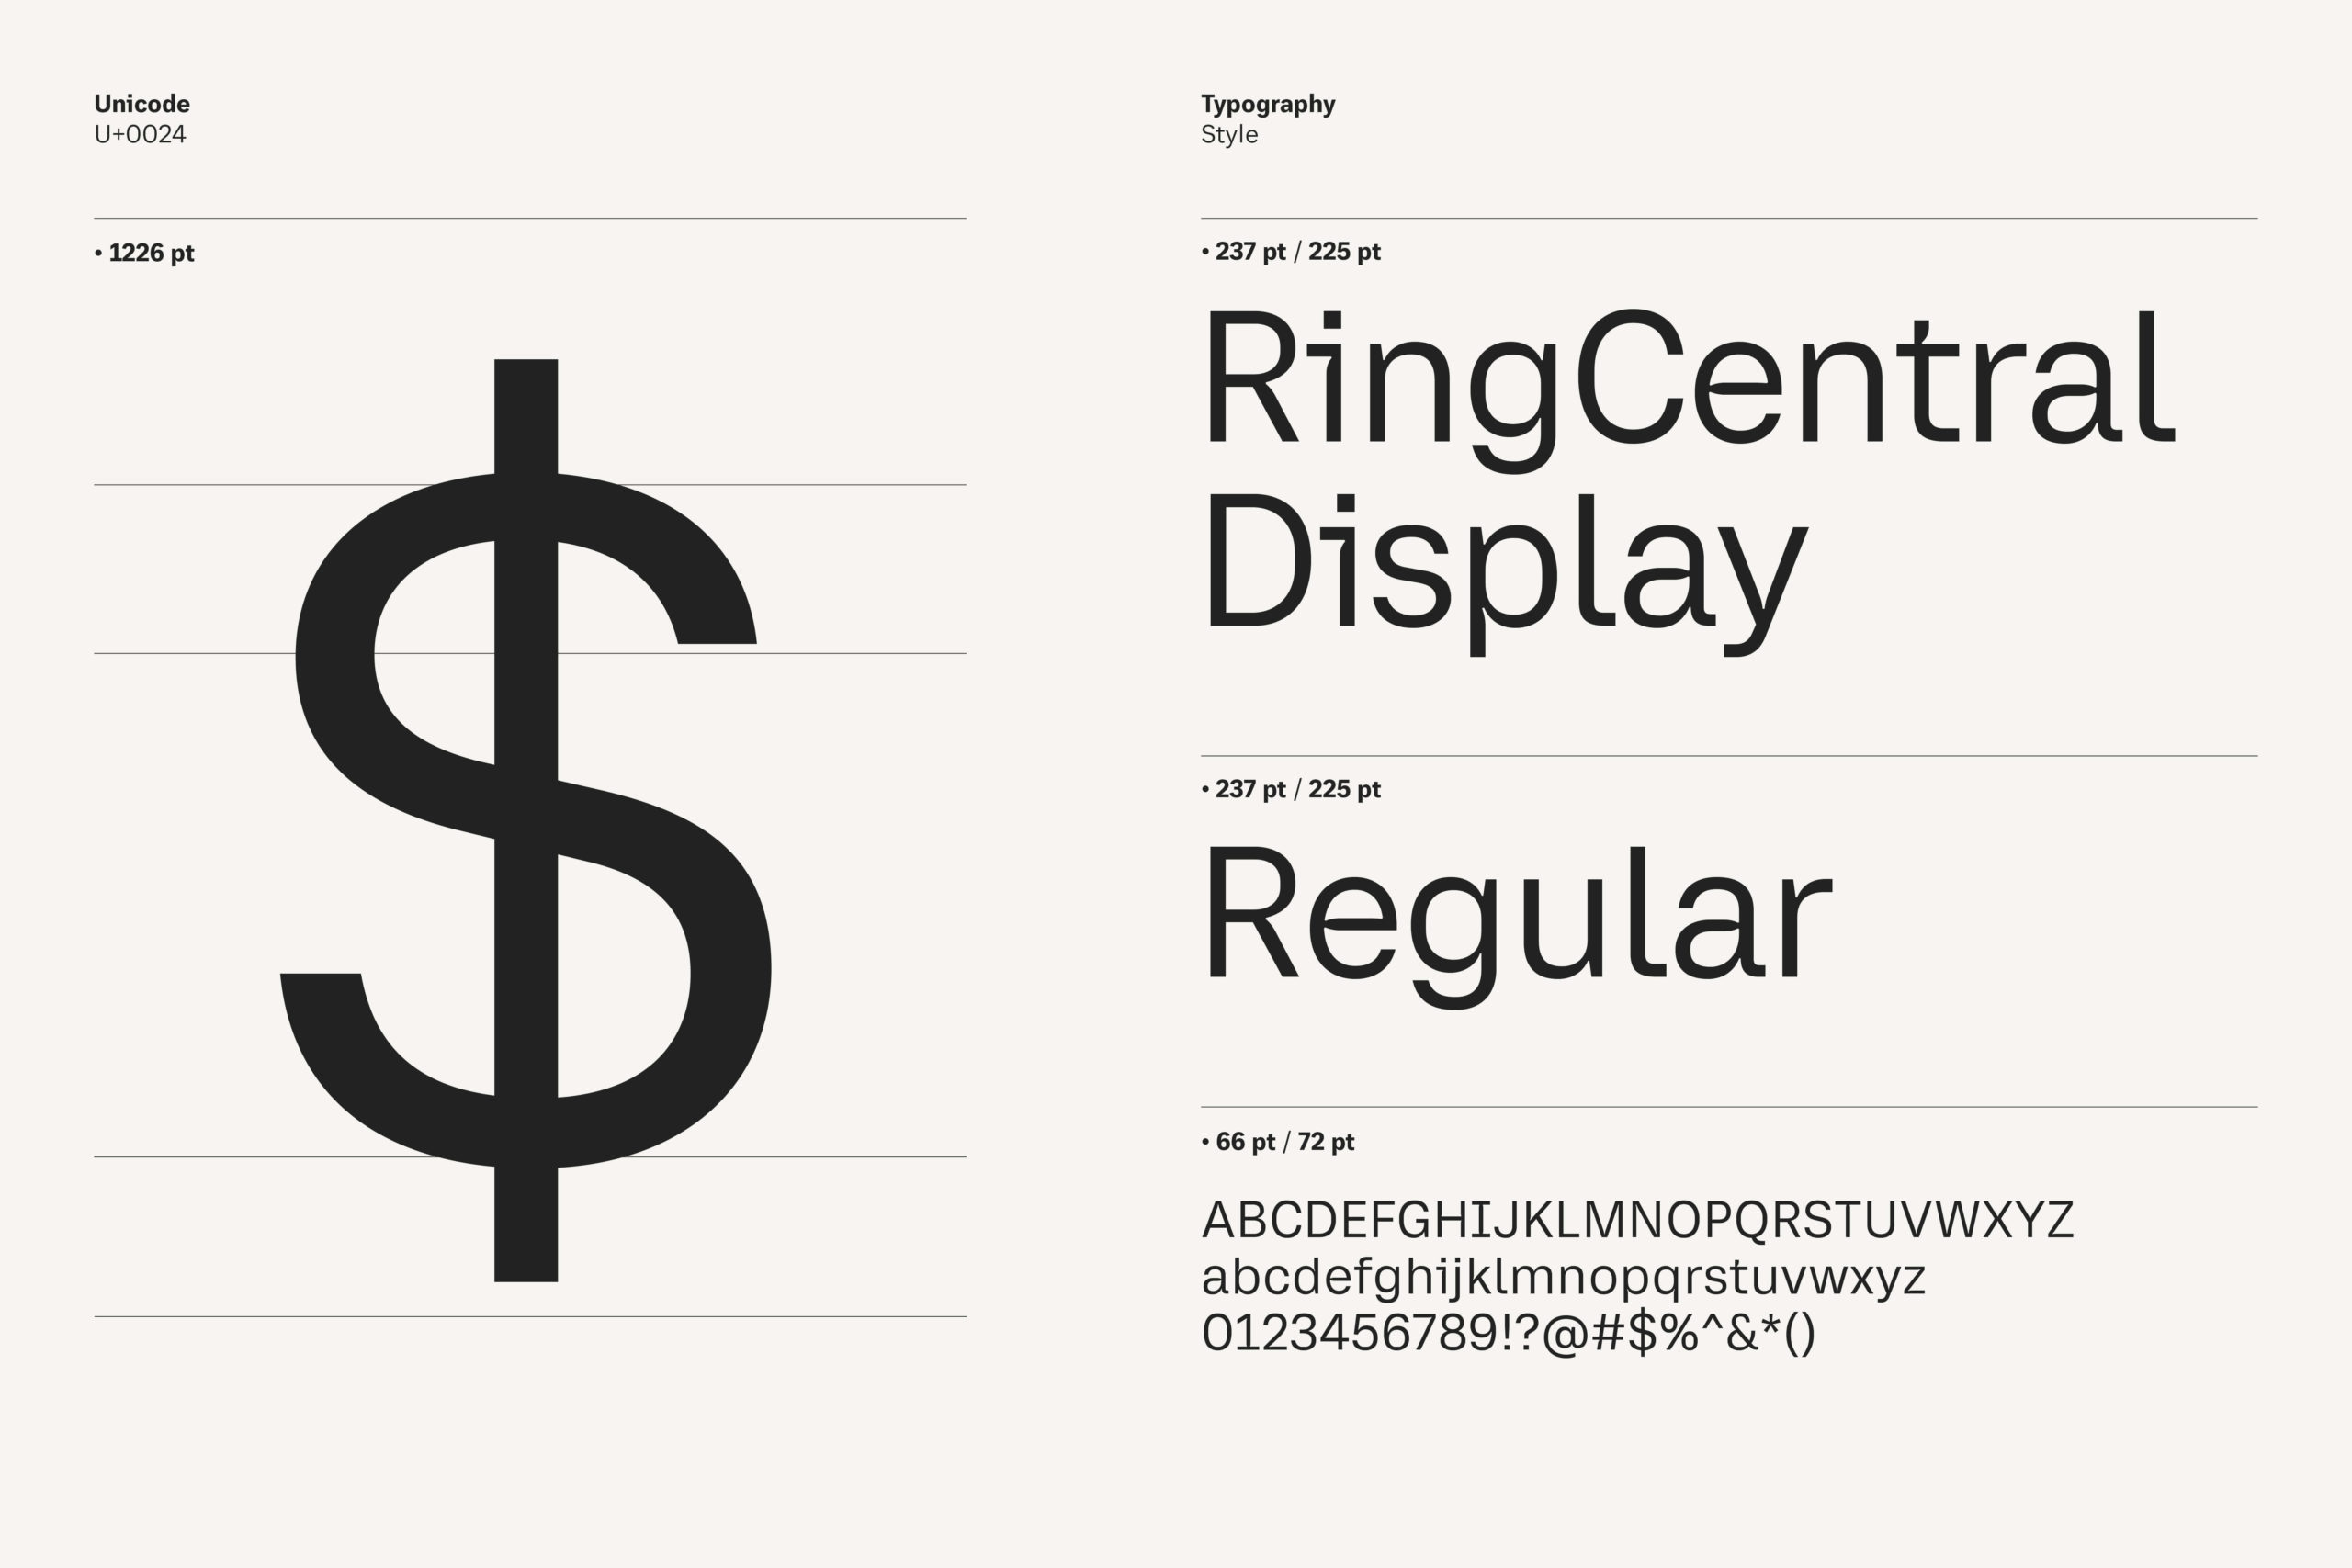 RingCentral Display_Typeface_09142217